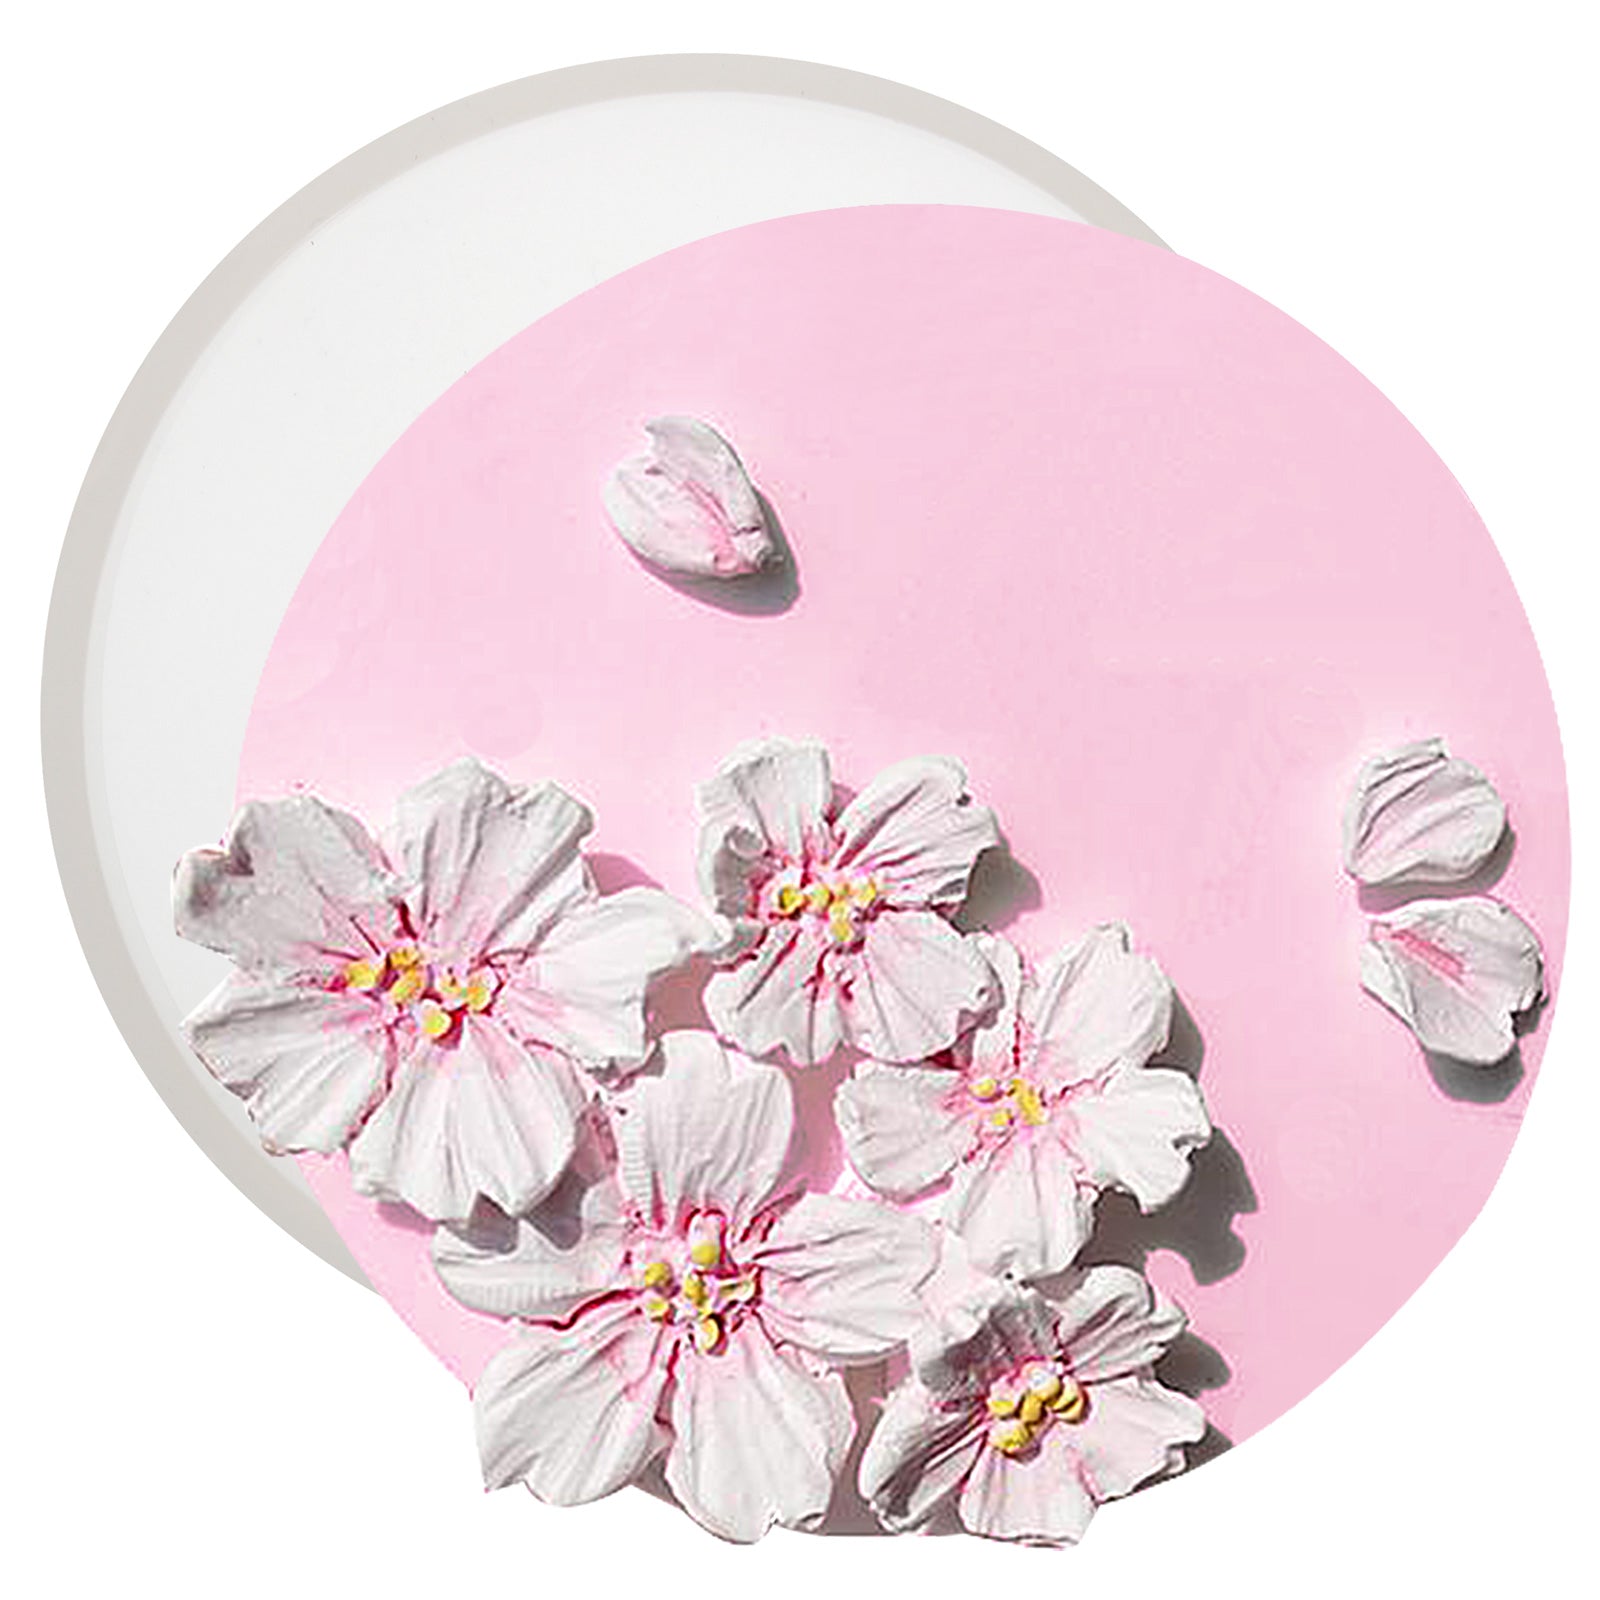 Funshowcase Silicone Resin Mold Round Coaster with Lip 3.1inch